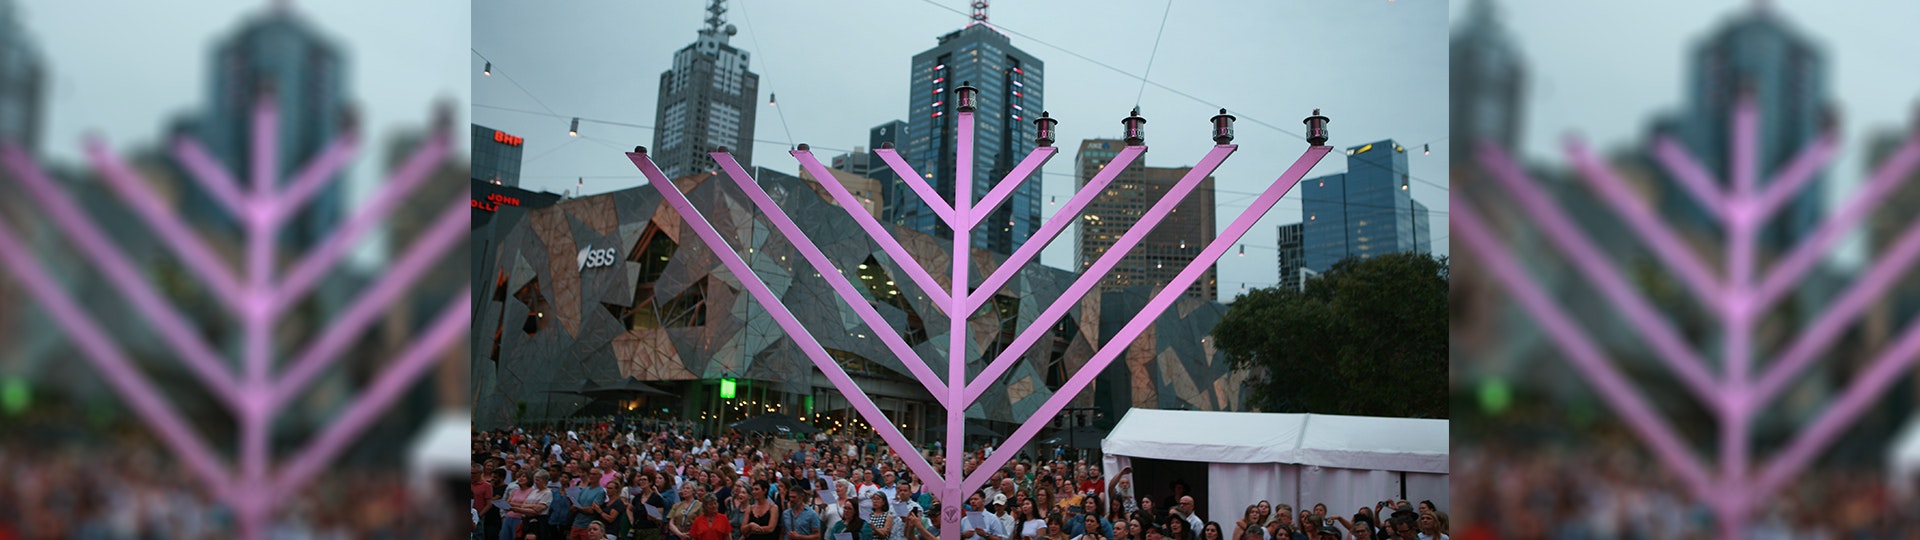 A large metal menorah on the stage at Fed Square with a crowd in the background